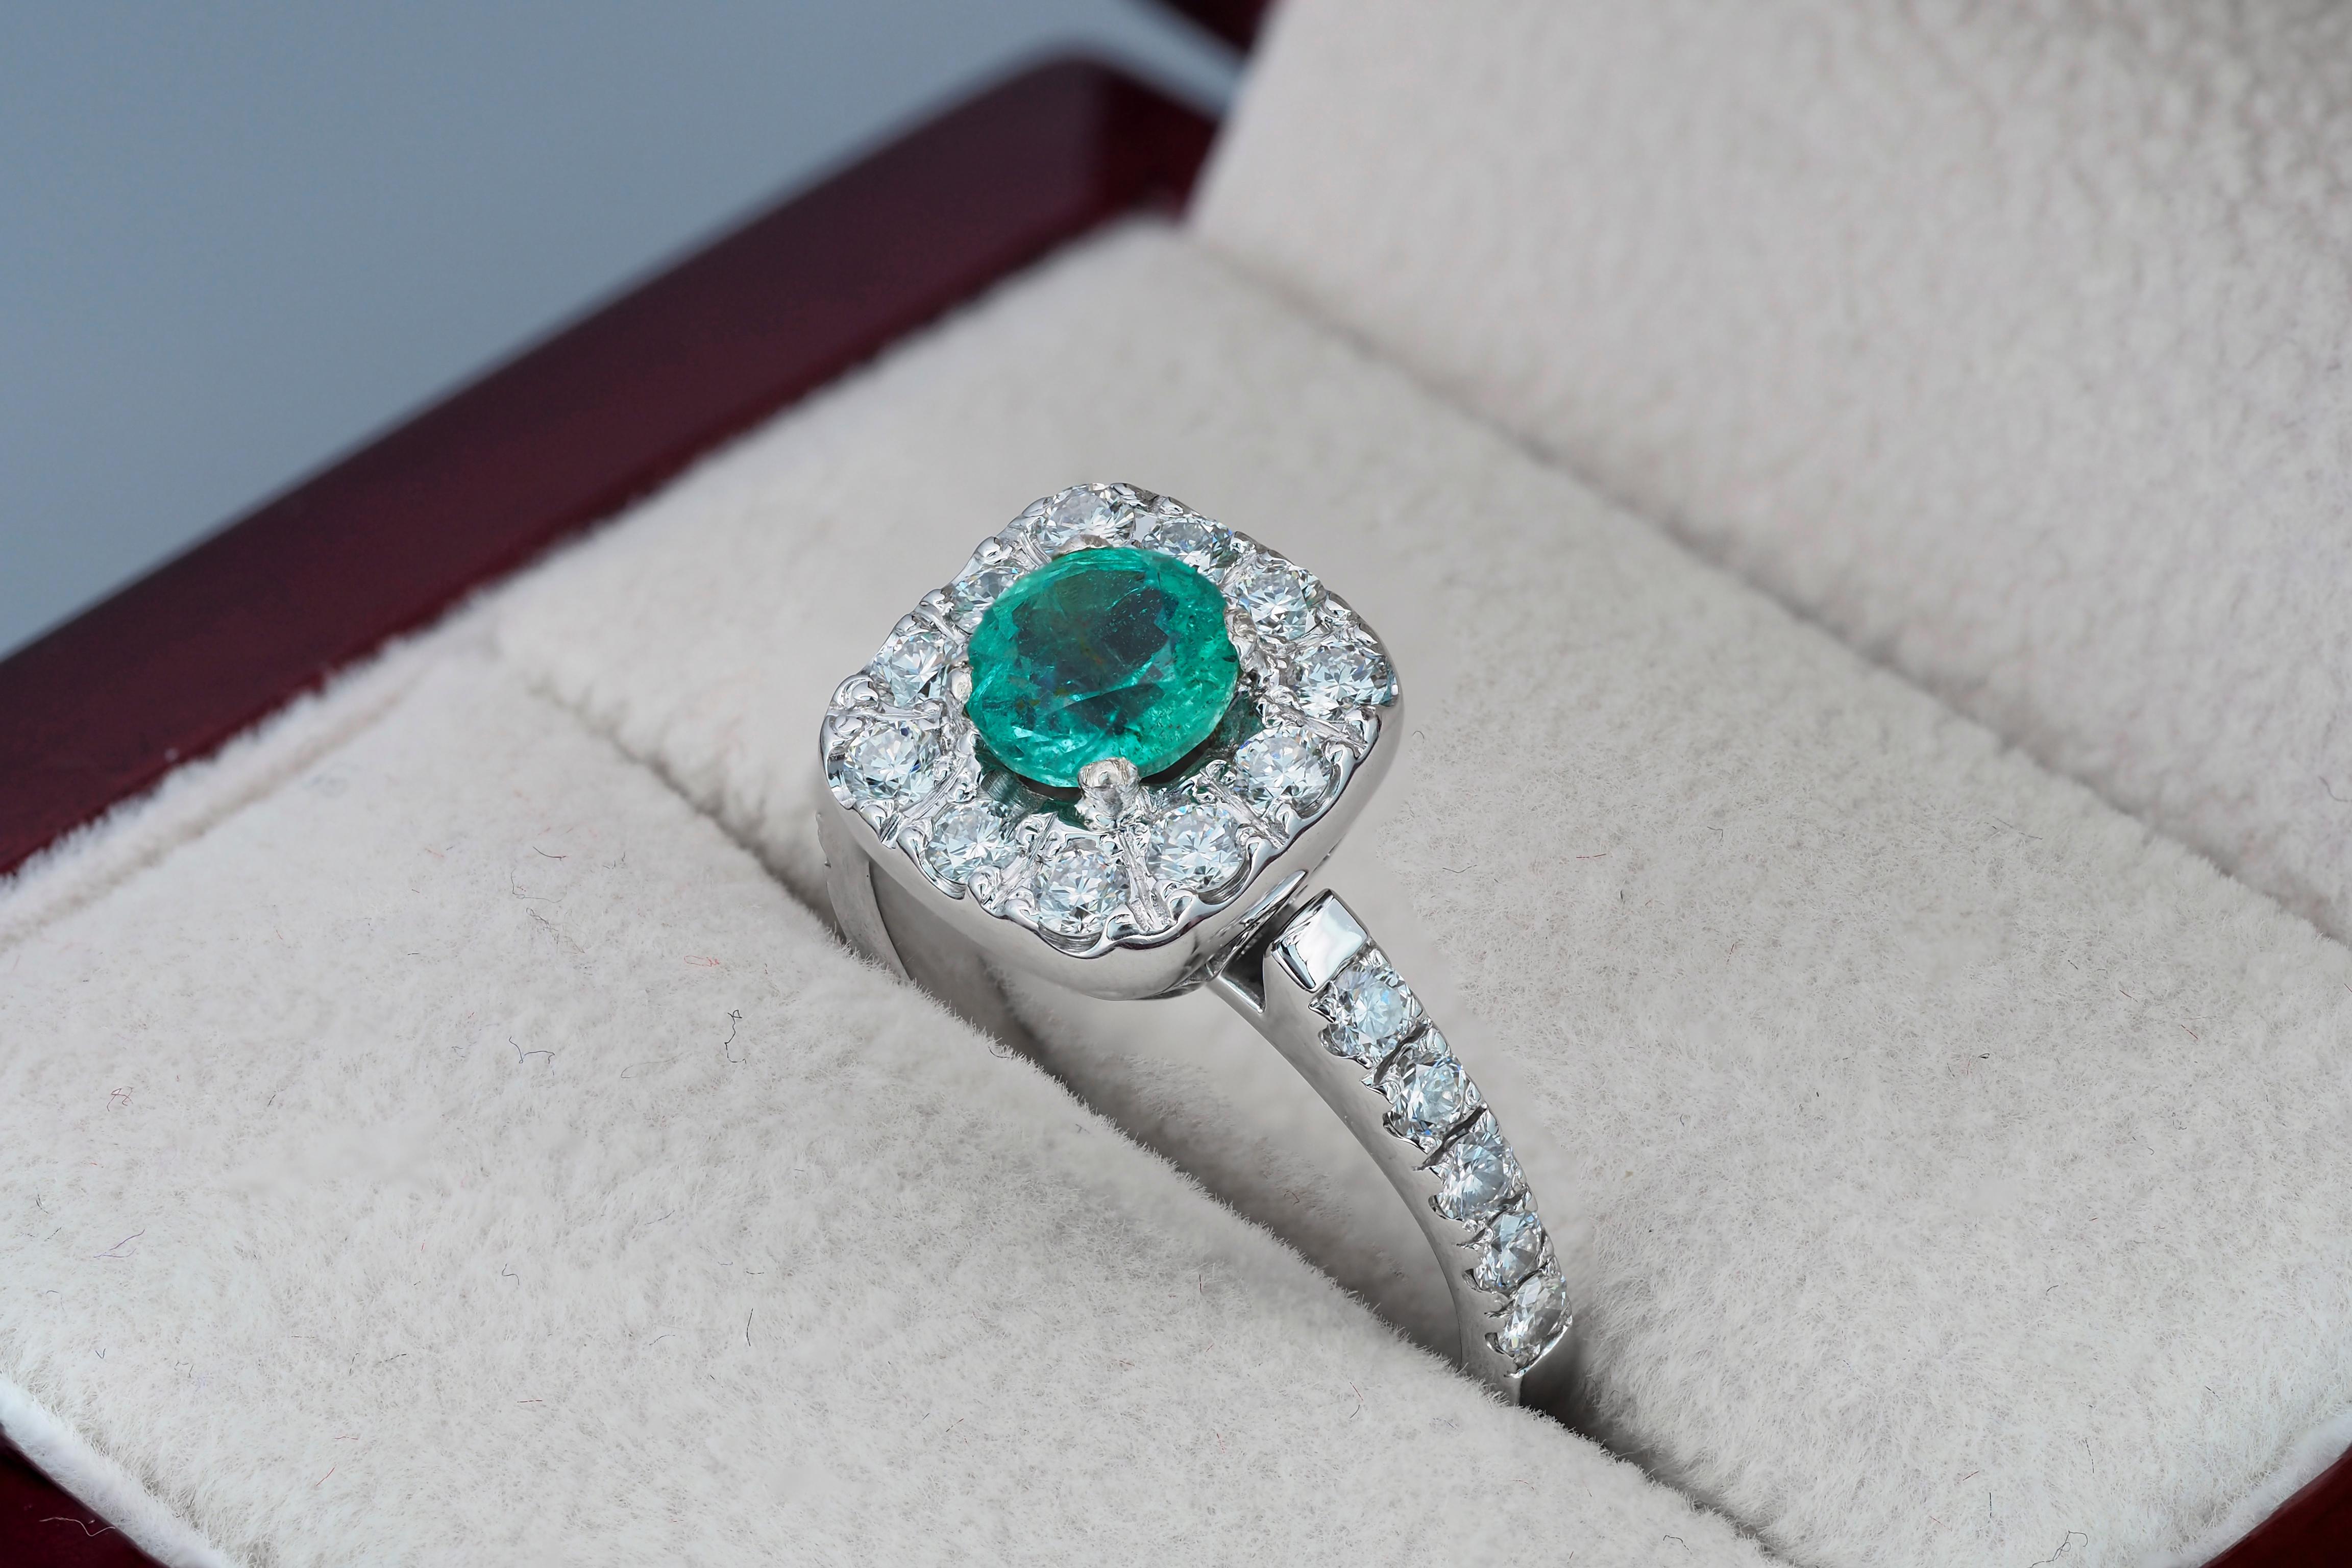 For Sale:  Emerald and Diamonds 14k Gold Ring, Vintage Style Emerald and Diamonds Ring 7